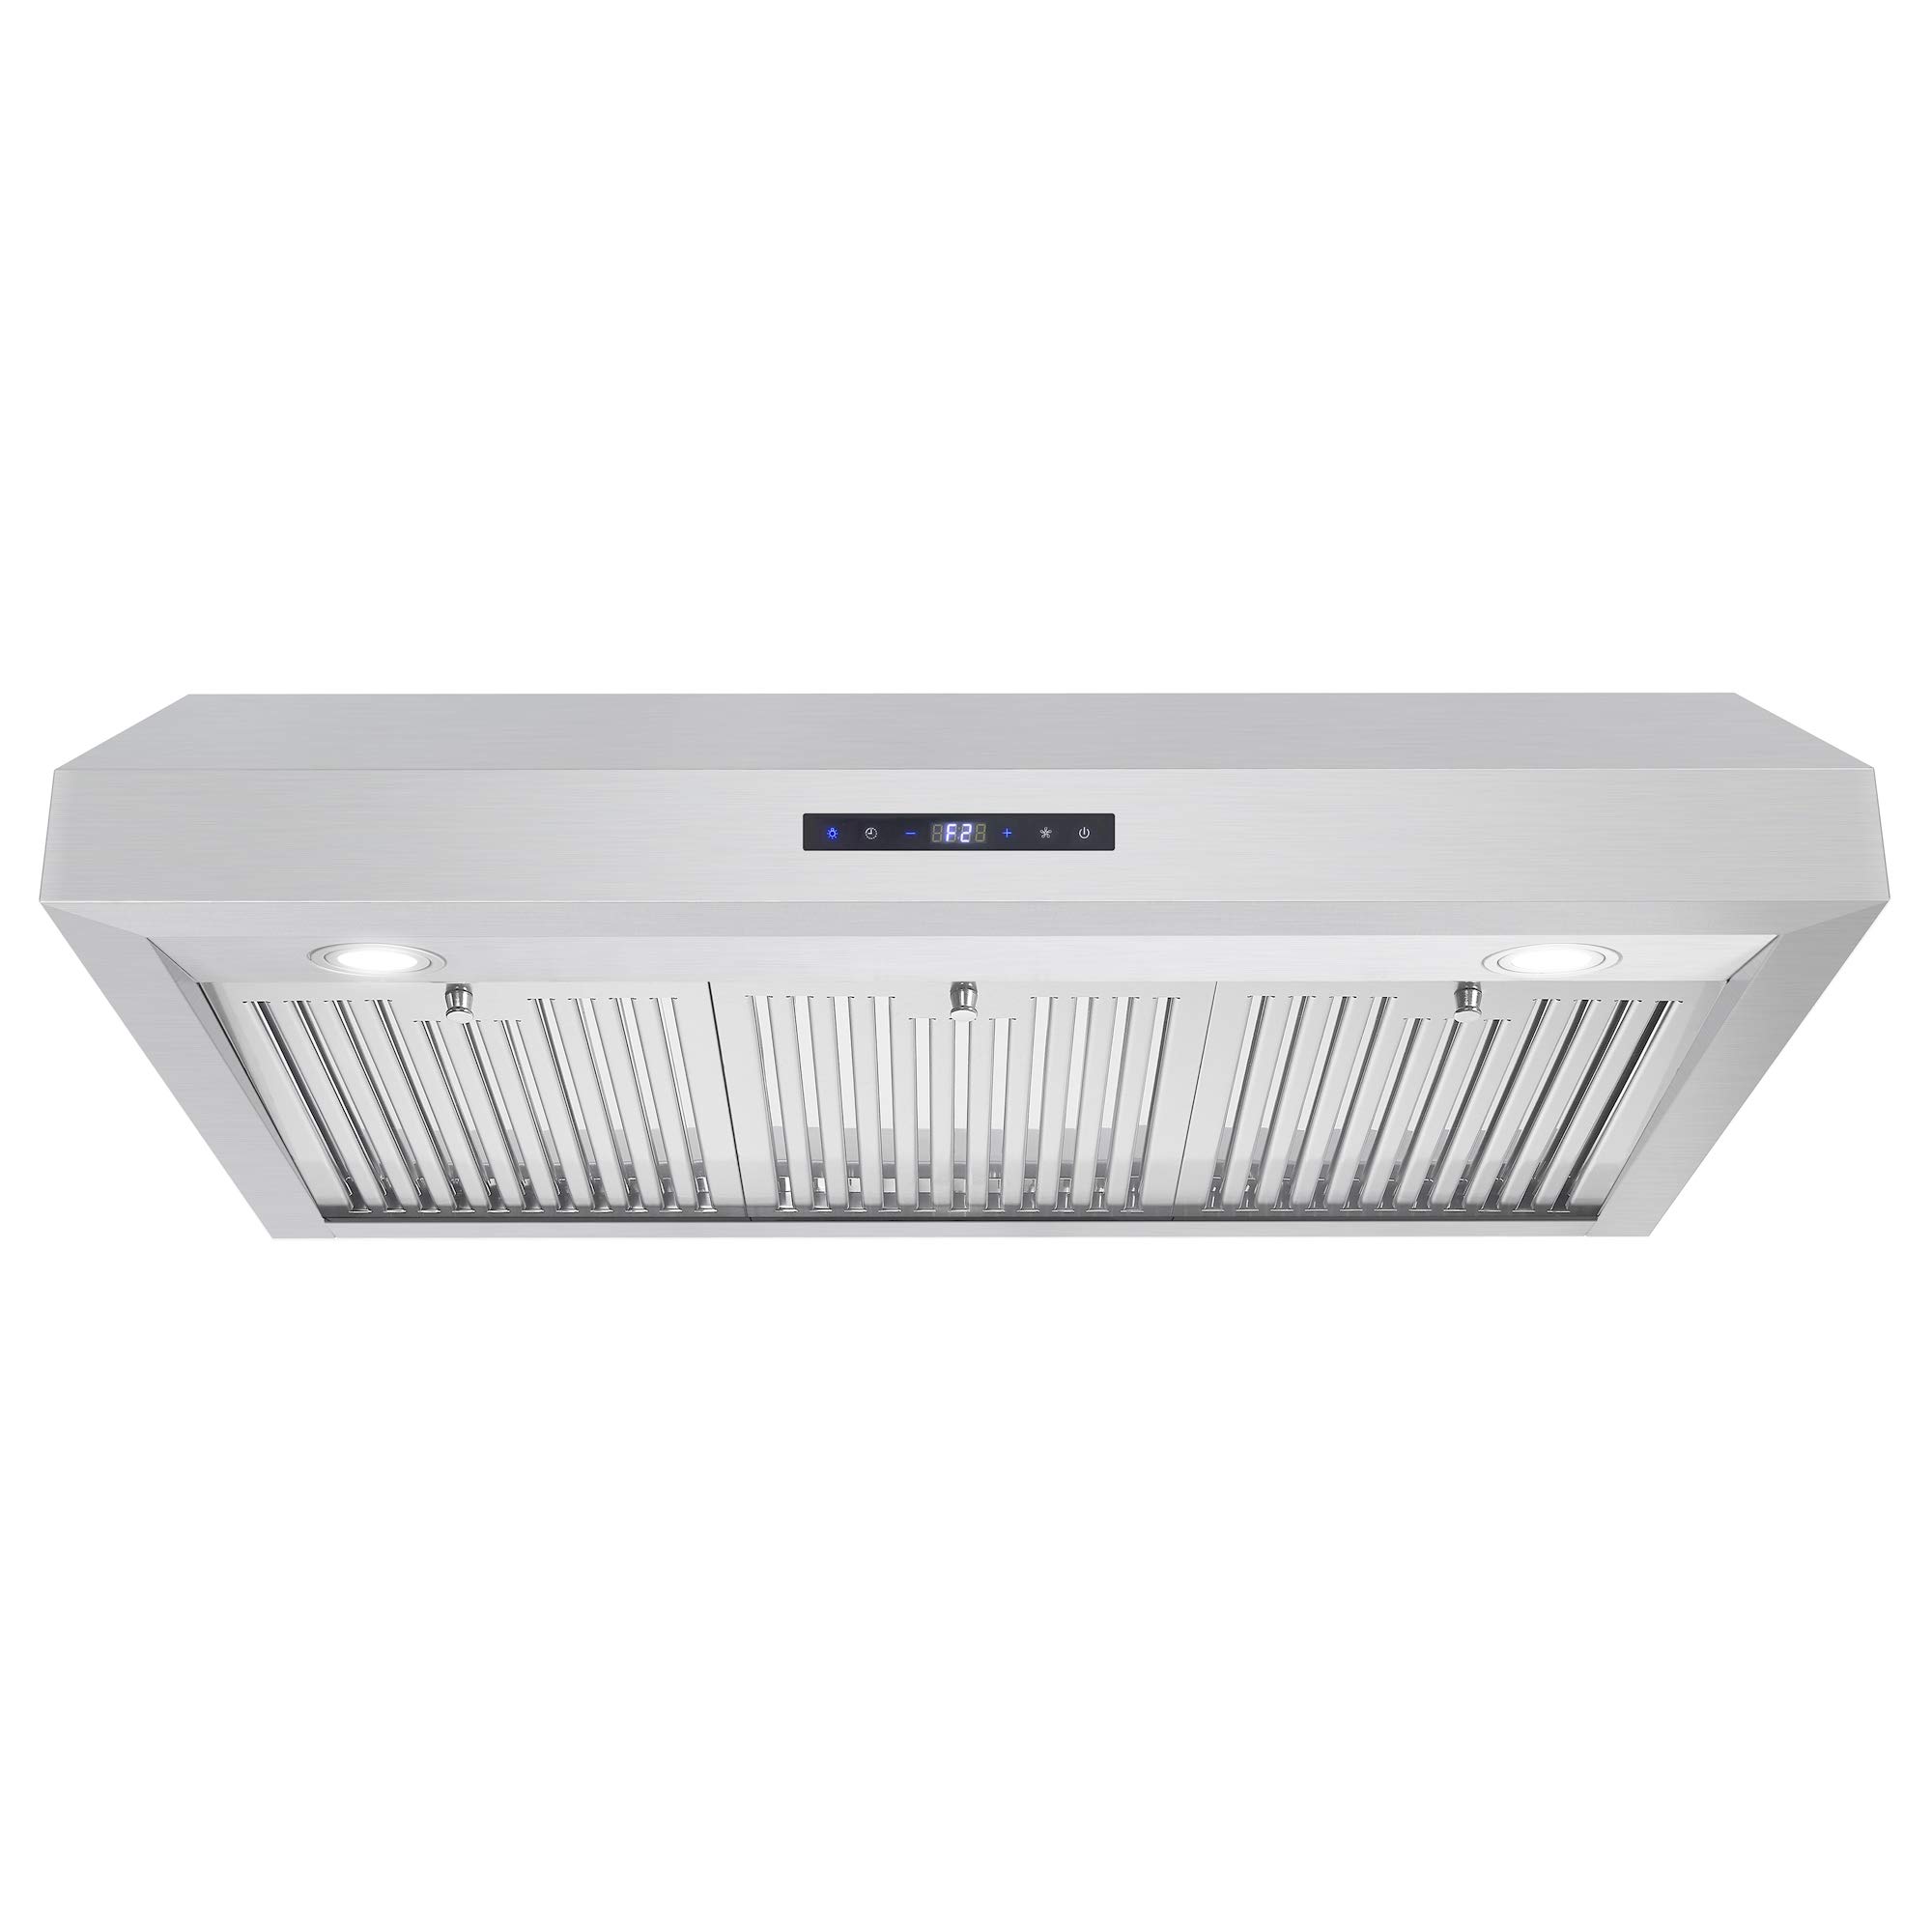 Cosmo UMC36 36 in. Ducted Under Cabinet Stainless Steel Range Hood with LED Light, 380 CFM, Permanent Filter, 36 inch